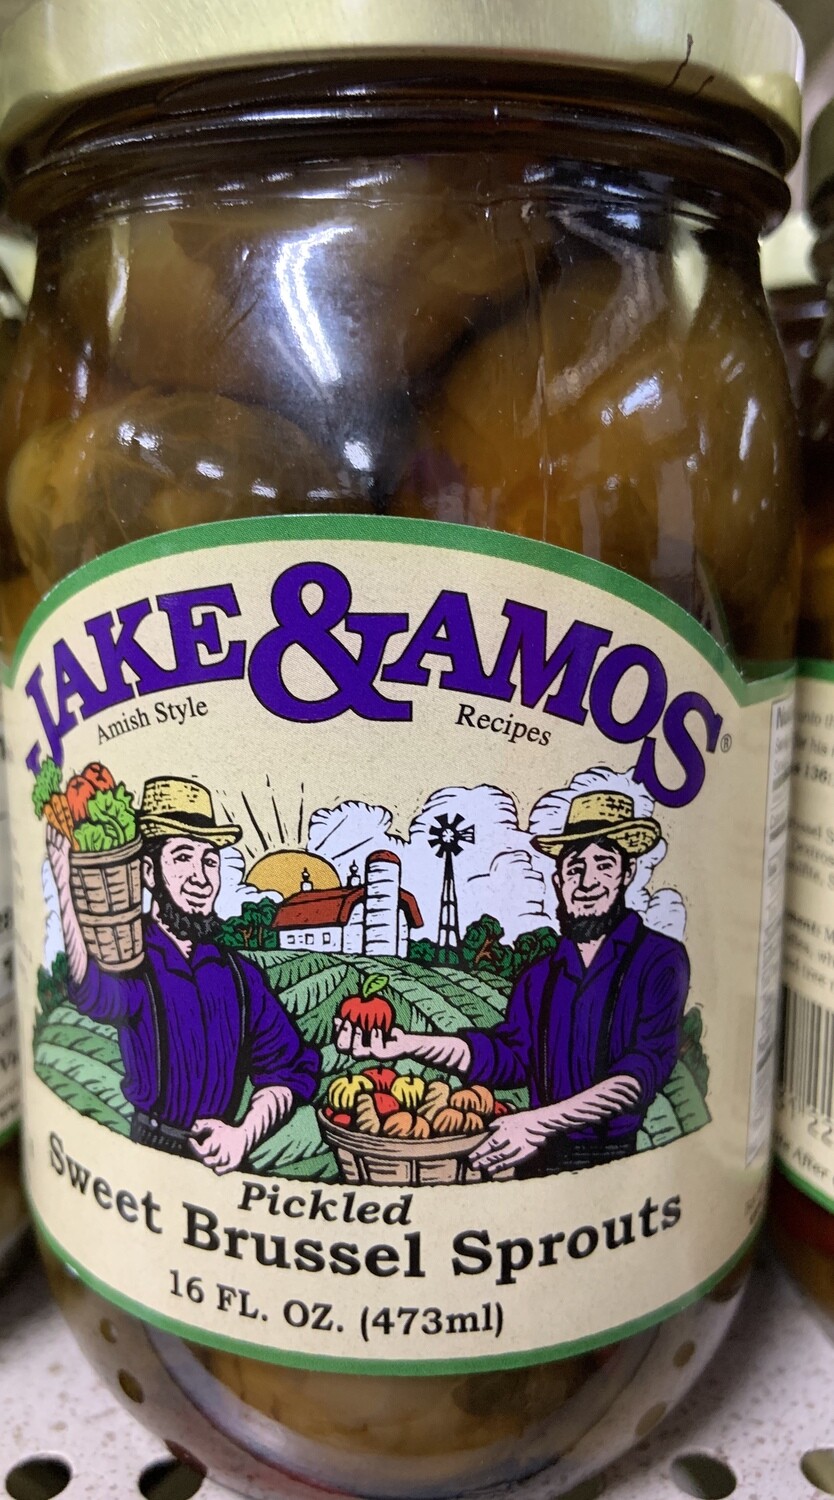 Jake & Amos Pickled Sweet Brussel Sprouts 16 oz